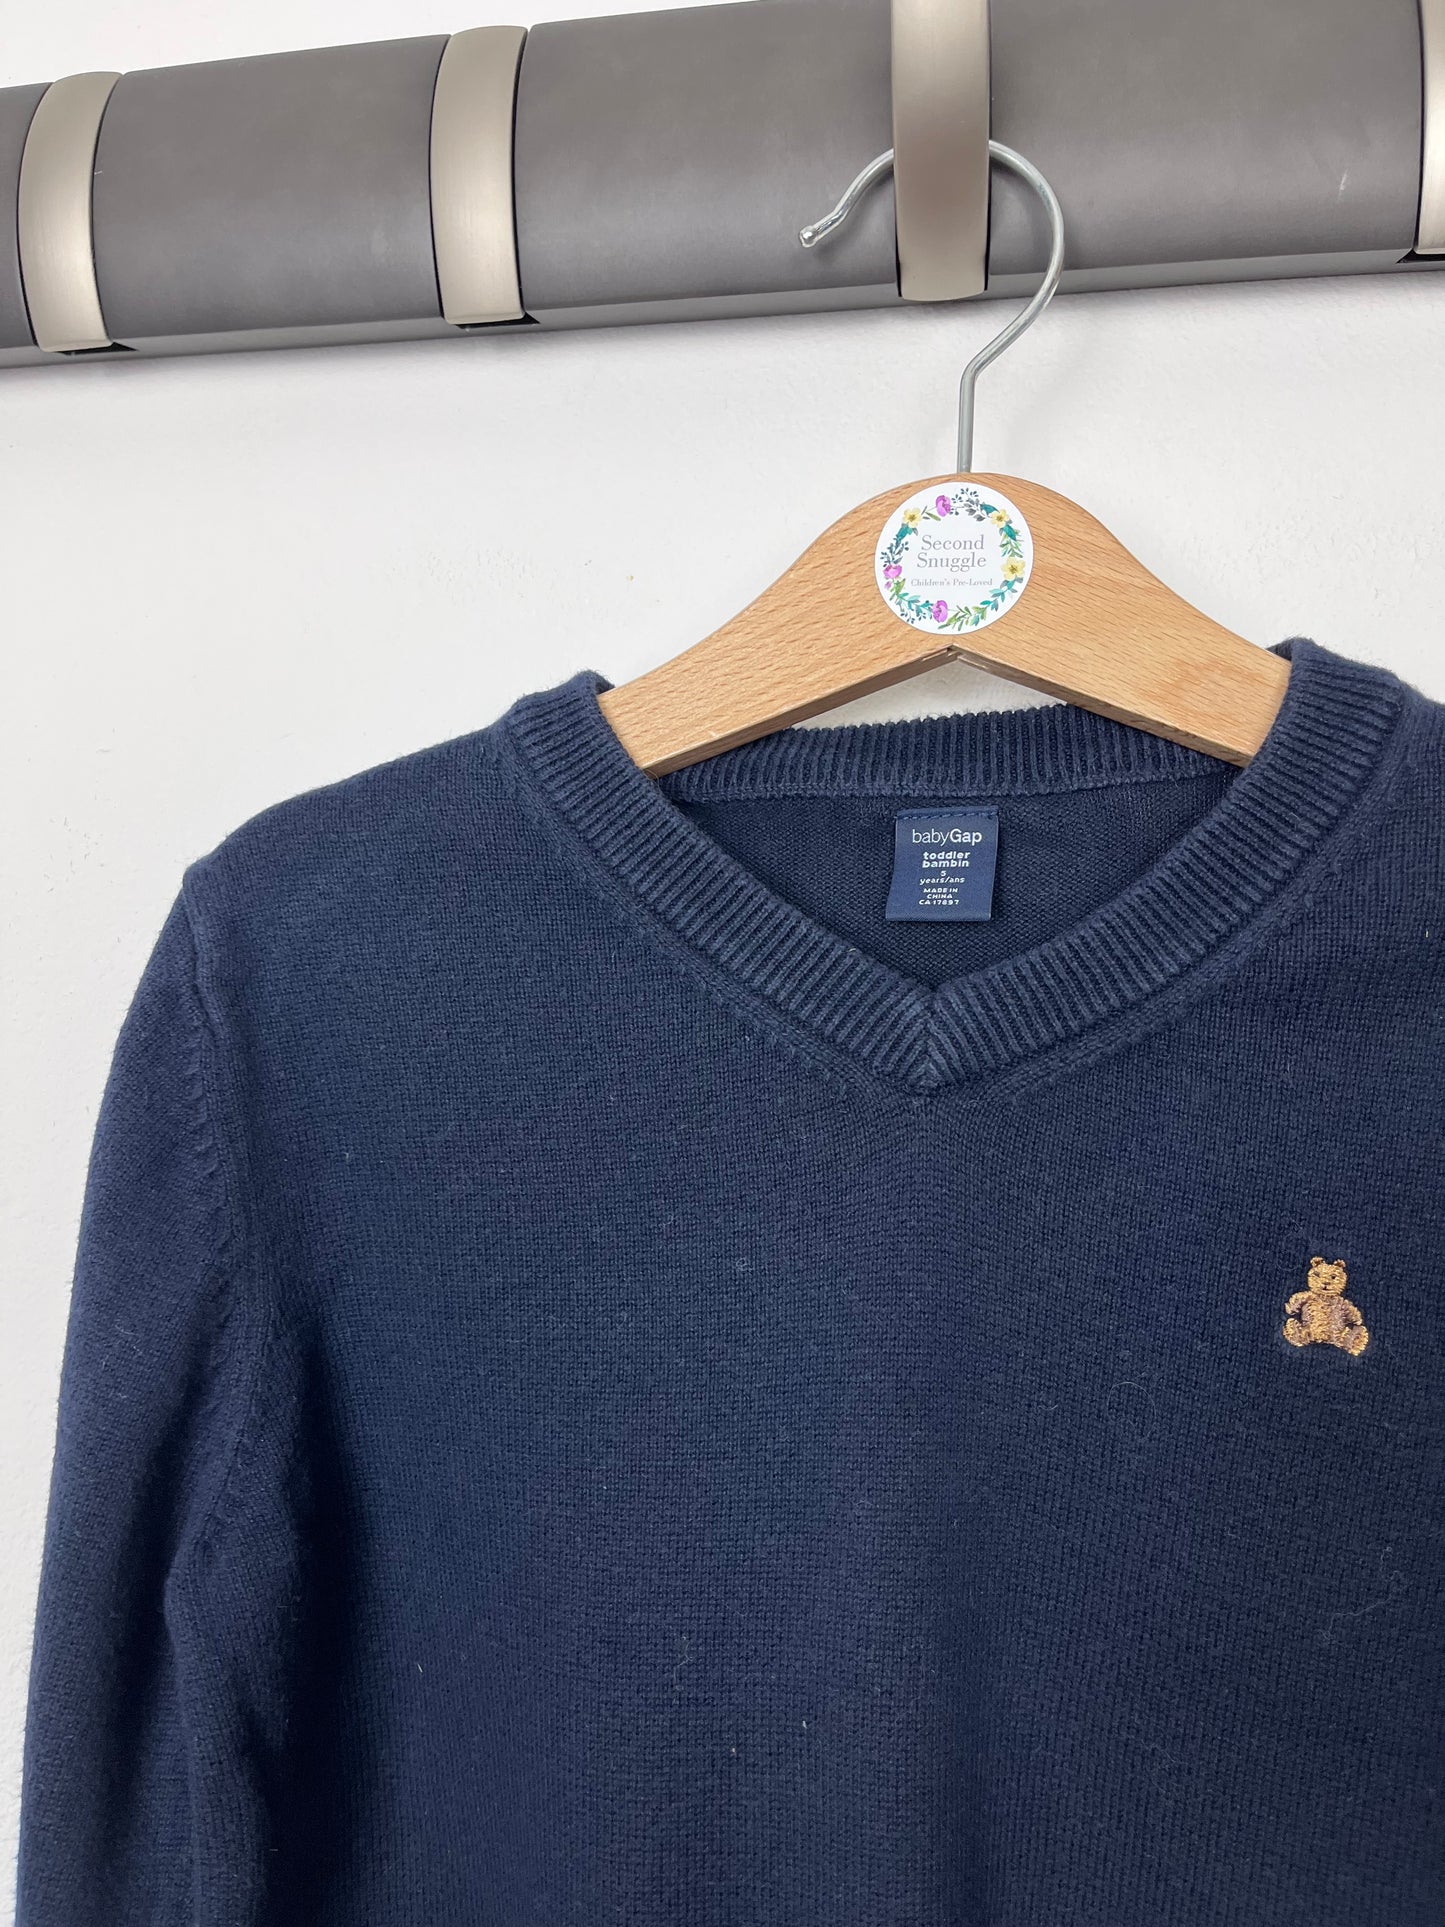 Gap 5 Years-Jumpers-Second Snuggle Preloved